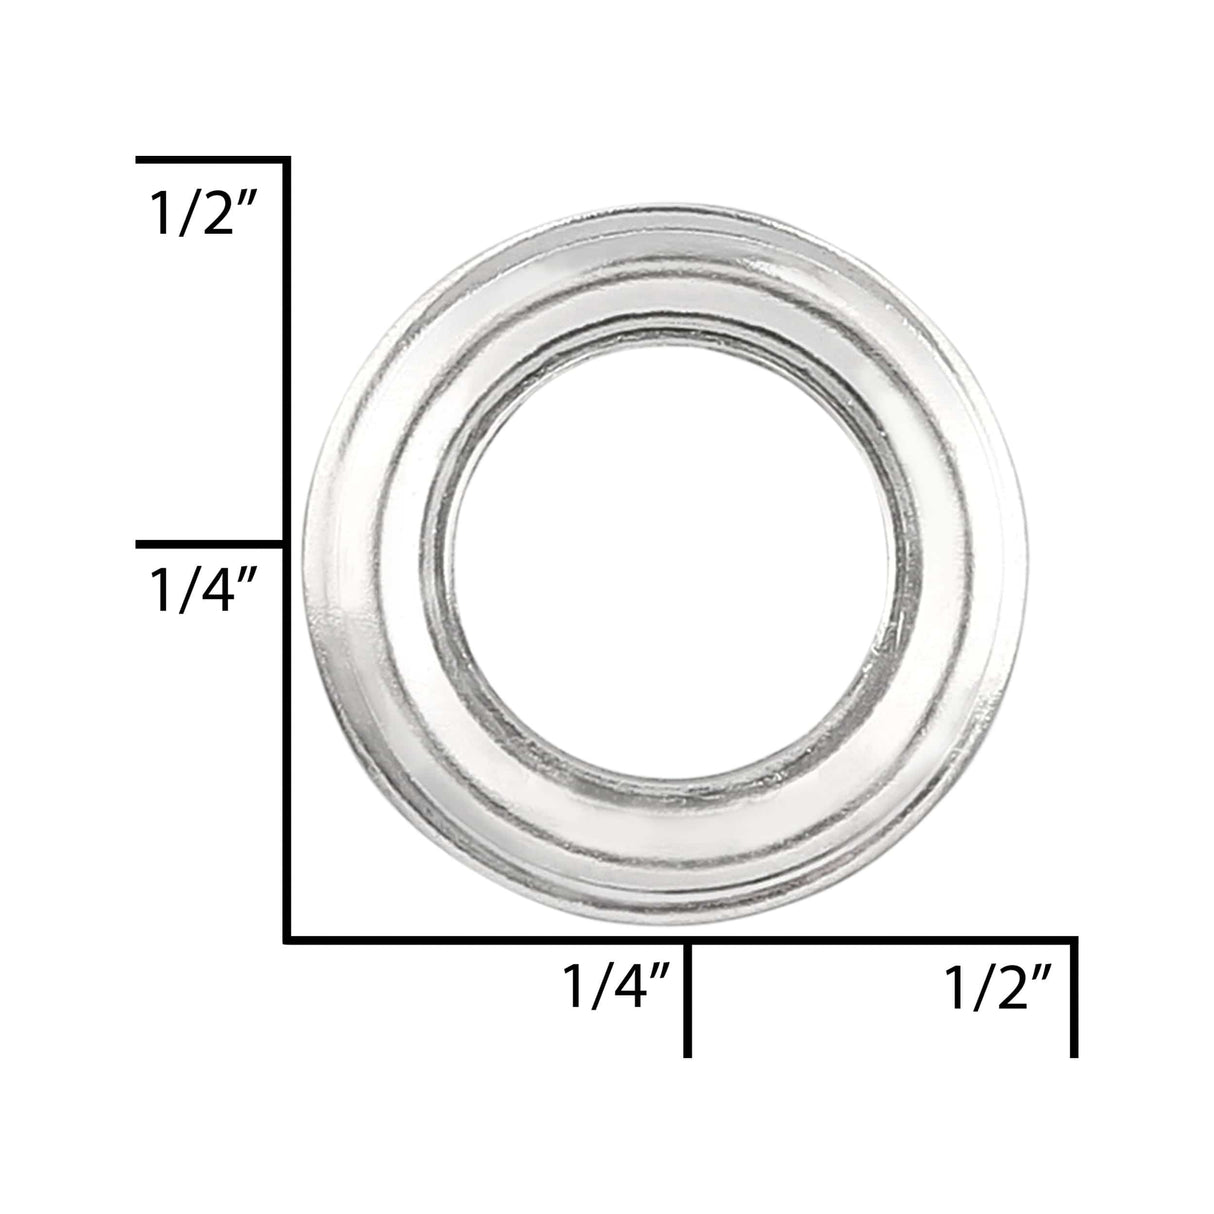 Ohio Travel Bag Fasteners 1/4" Nickel, Washer, Steel - 24 pk, #A-400-NP A-400-NP